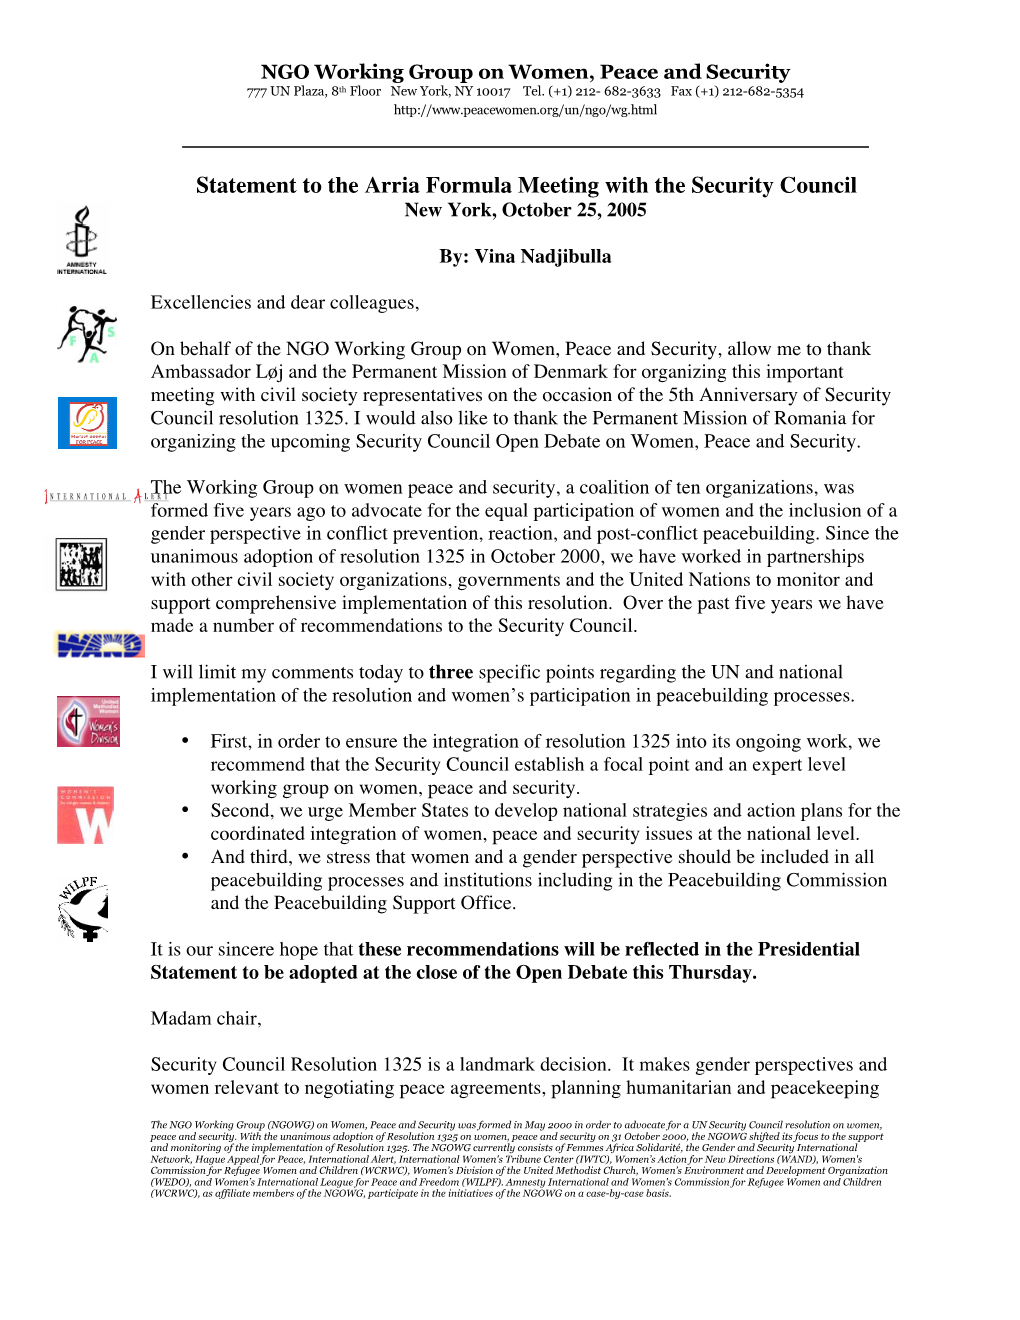 Statement to the Arria Formula Meeting with the Security Council New York, October 25, 2005